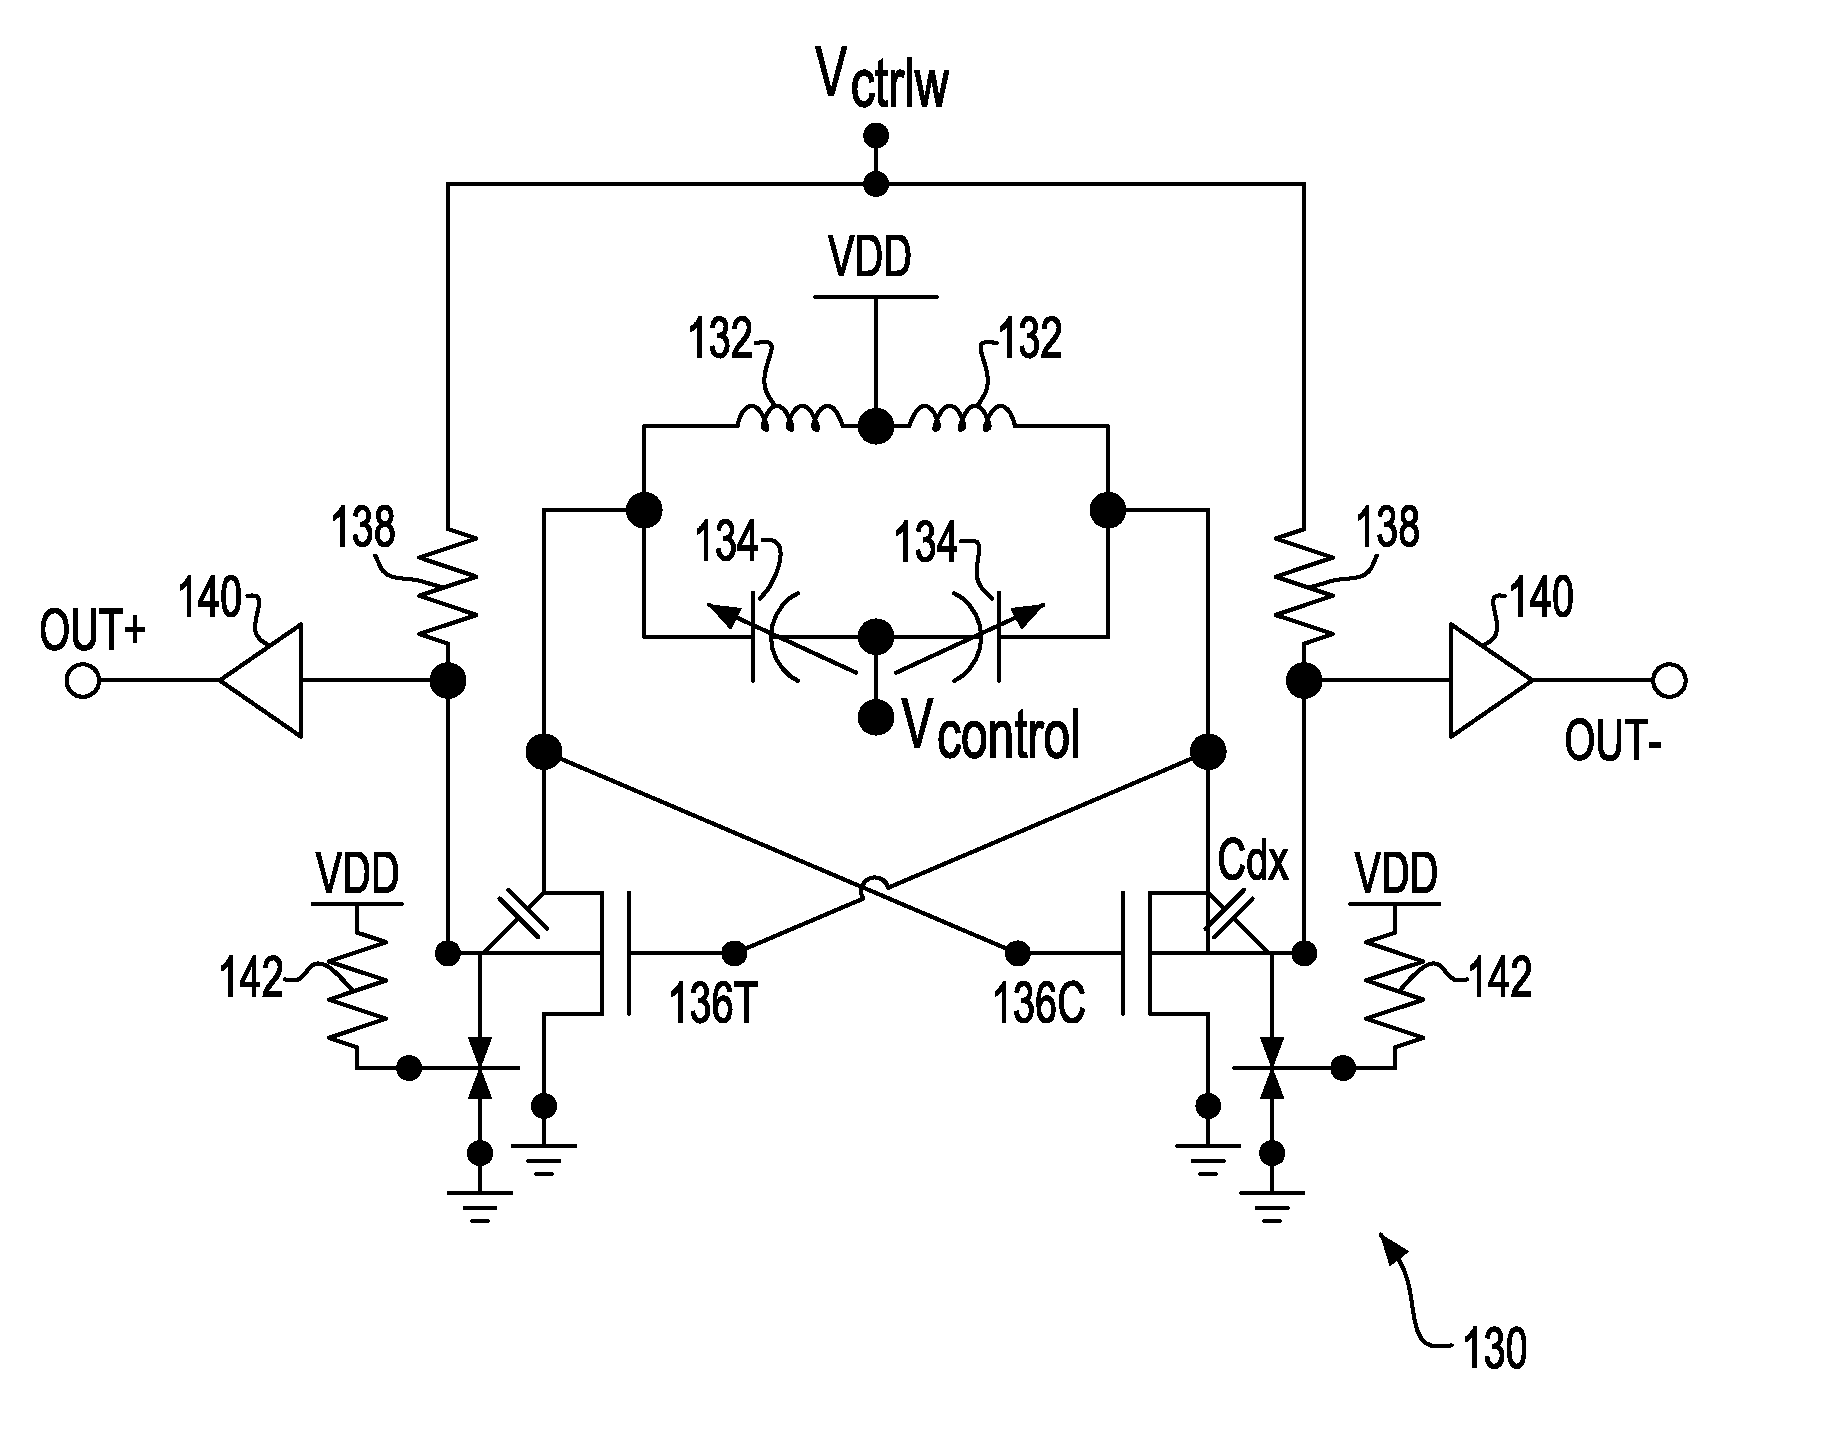 Load tolerant voltage controlled oscillator (VCO), IC and CMOS IC including the VCO